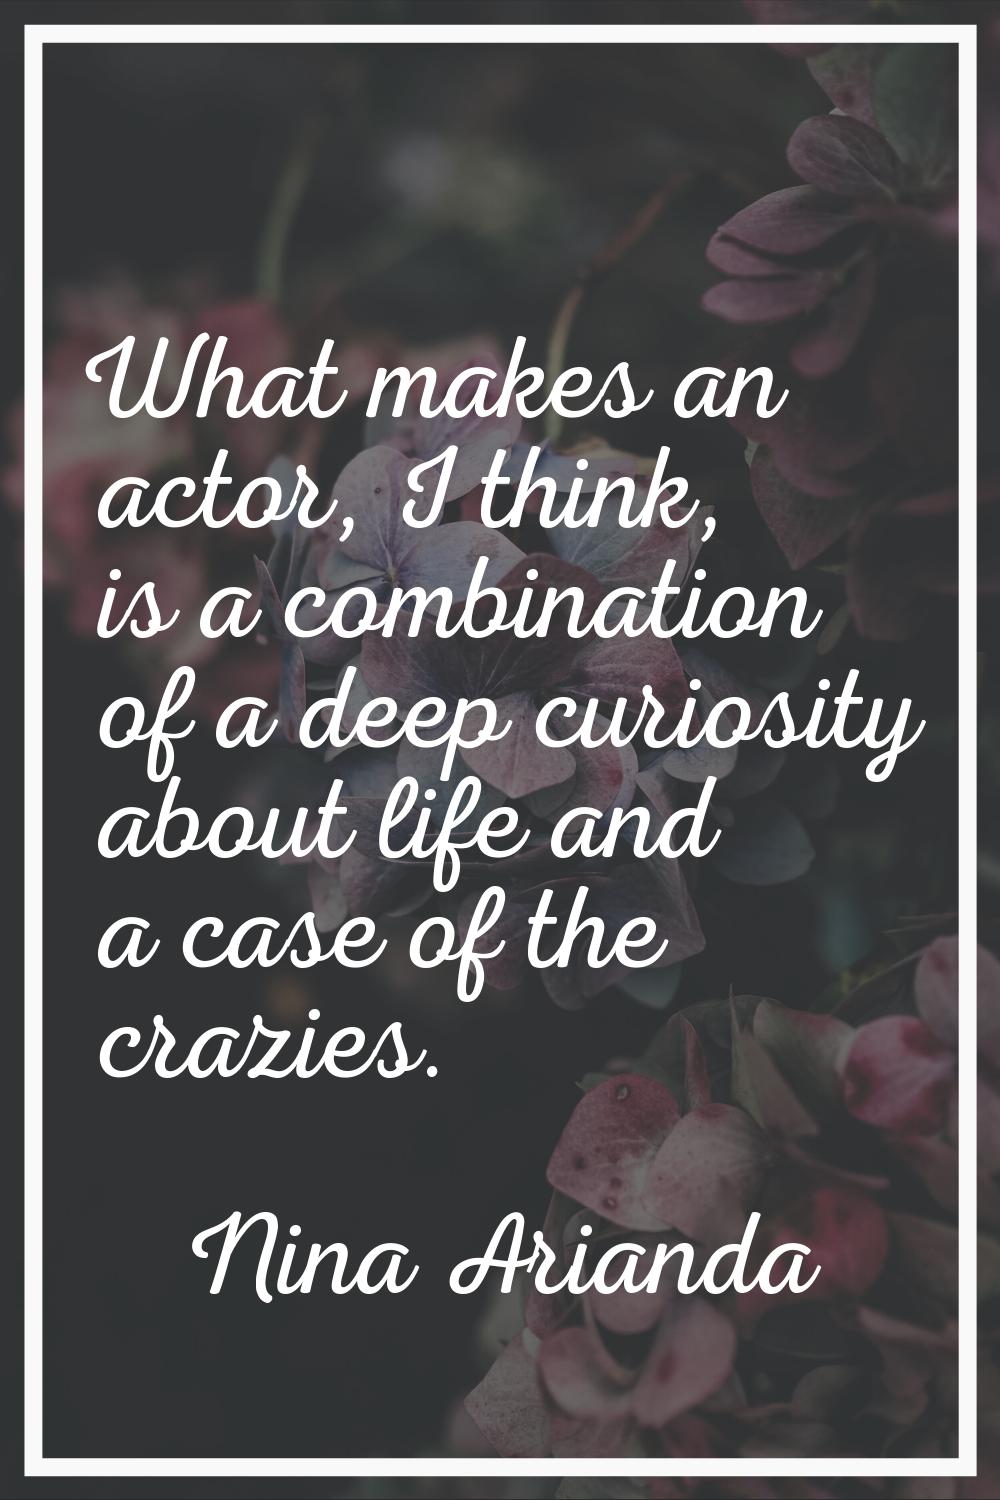 What makes an actor, I think, is a combination of a deep curiosity about life and a case of the cra